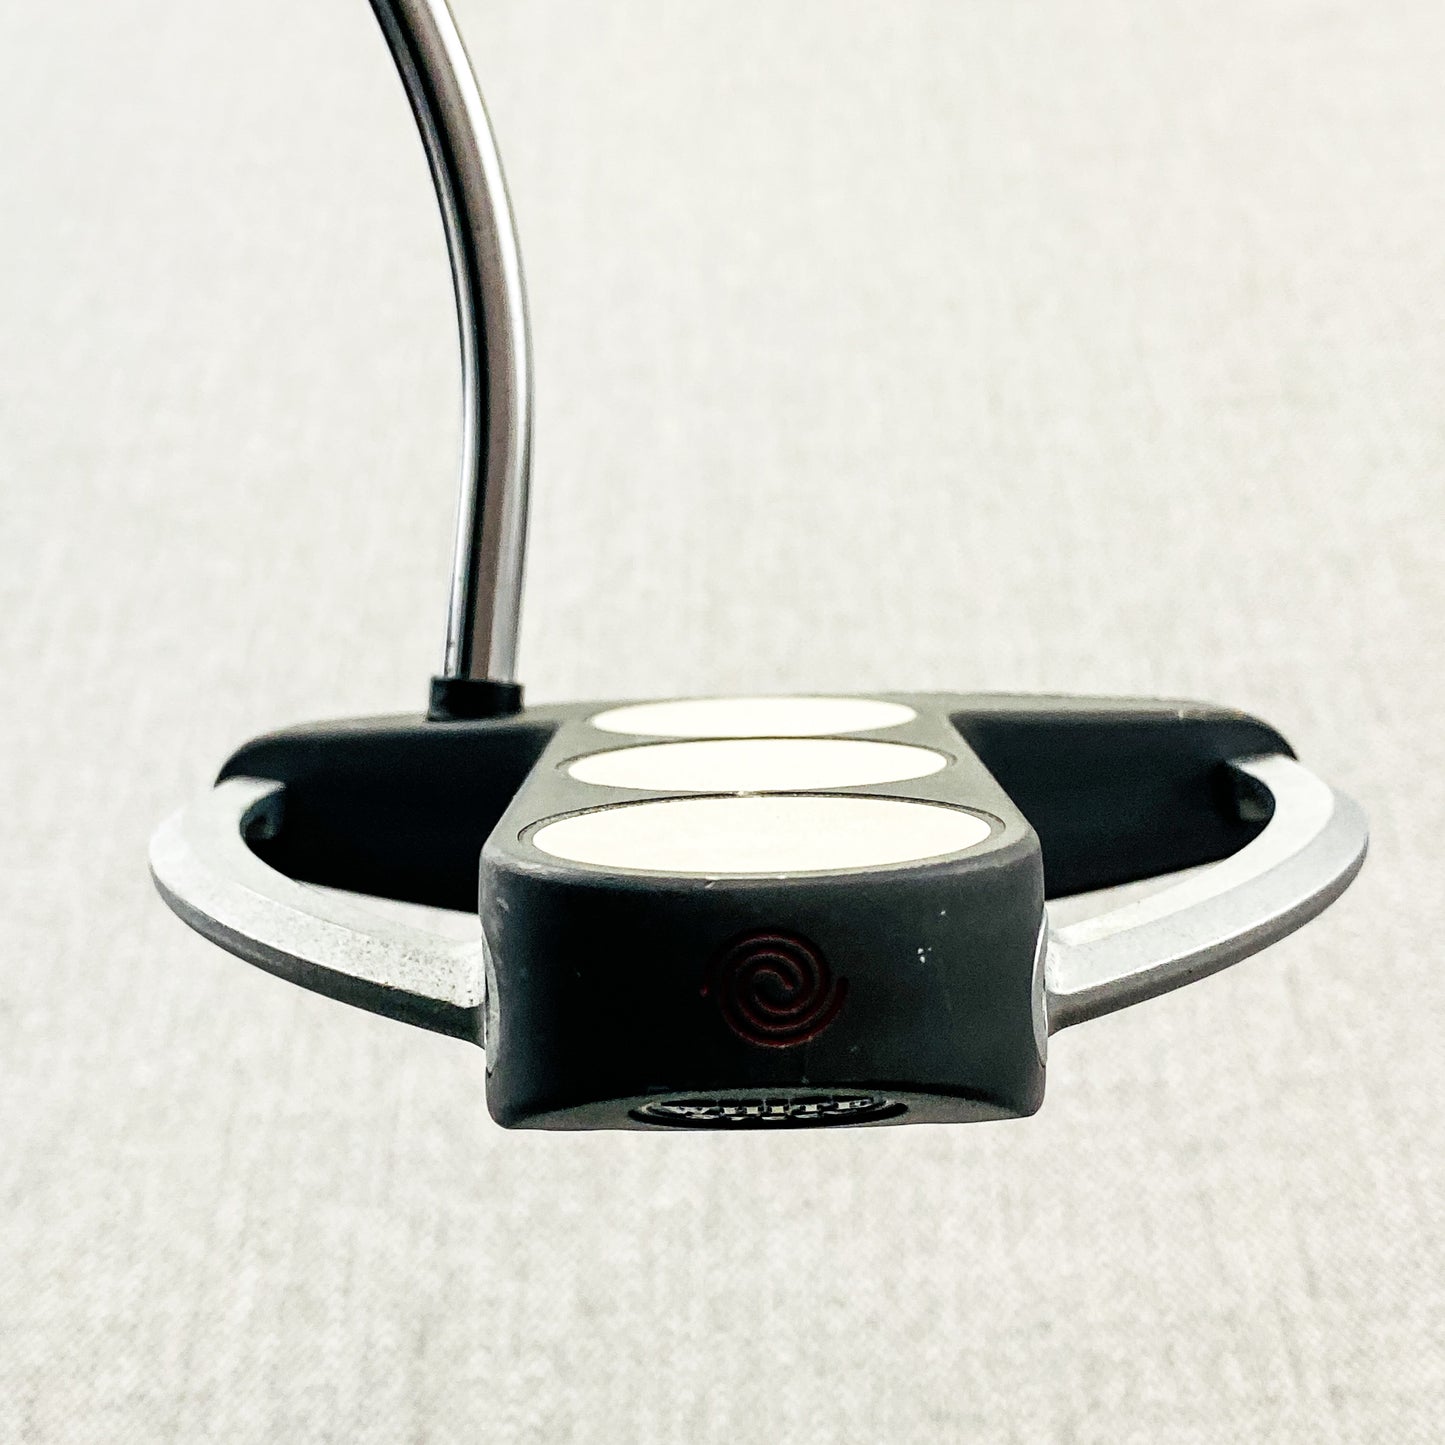 Odyssey White Hot TriBall SRT Putter. 35 inch - Average Condition # 11782